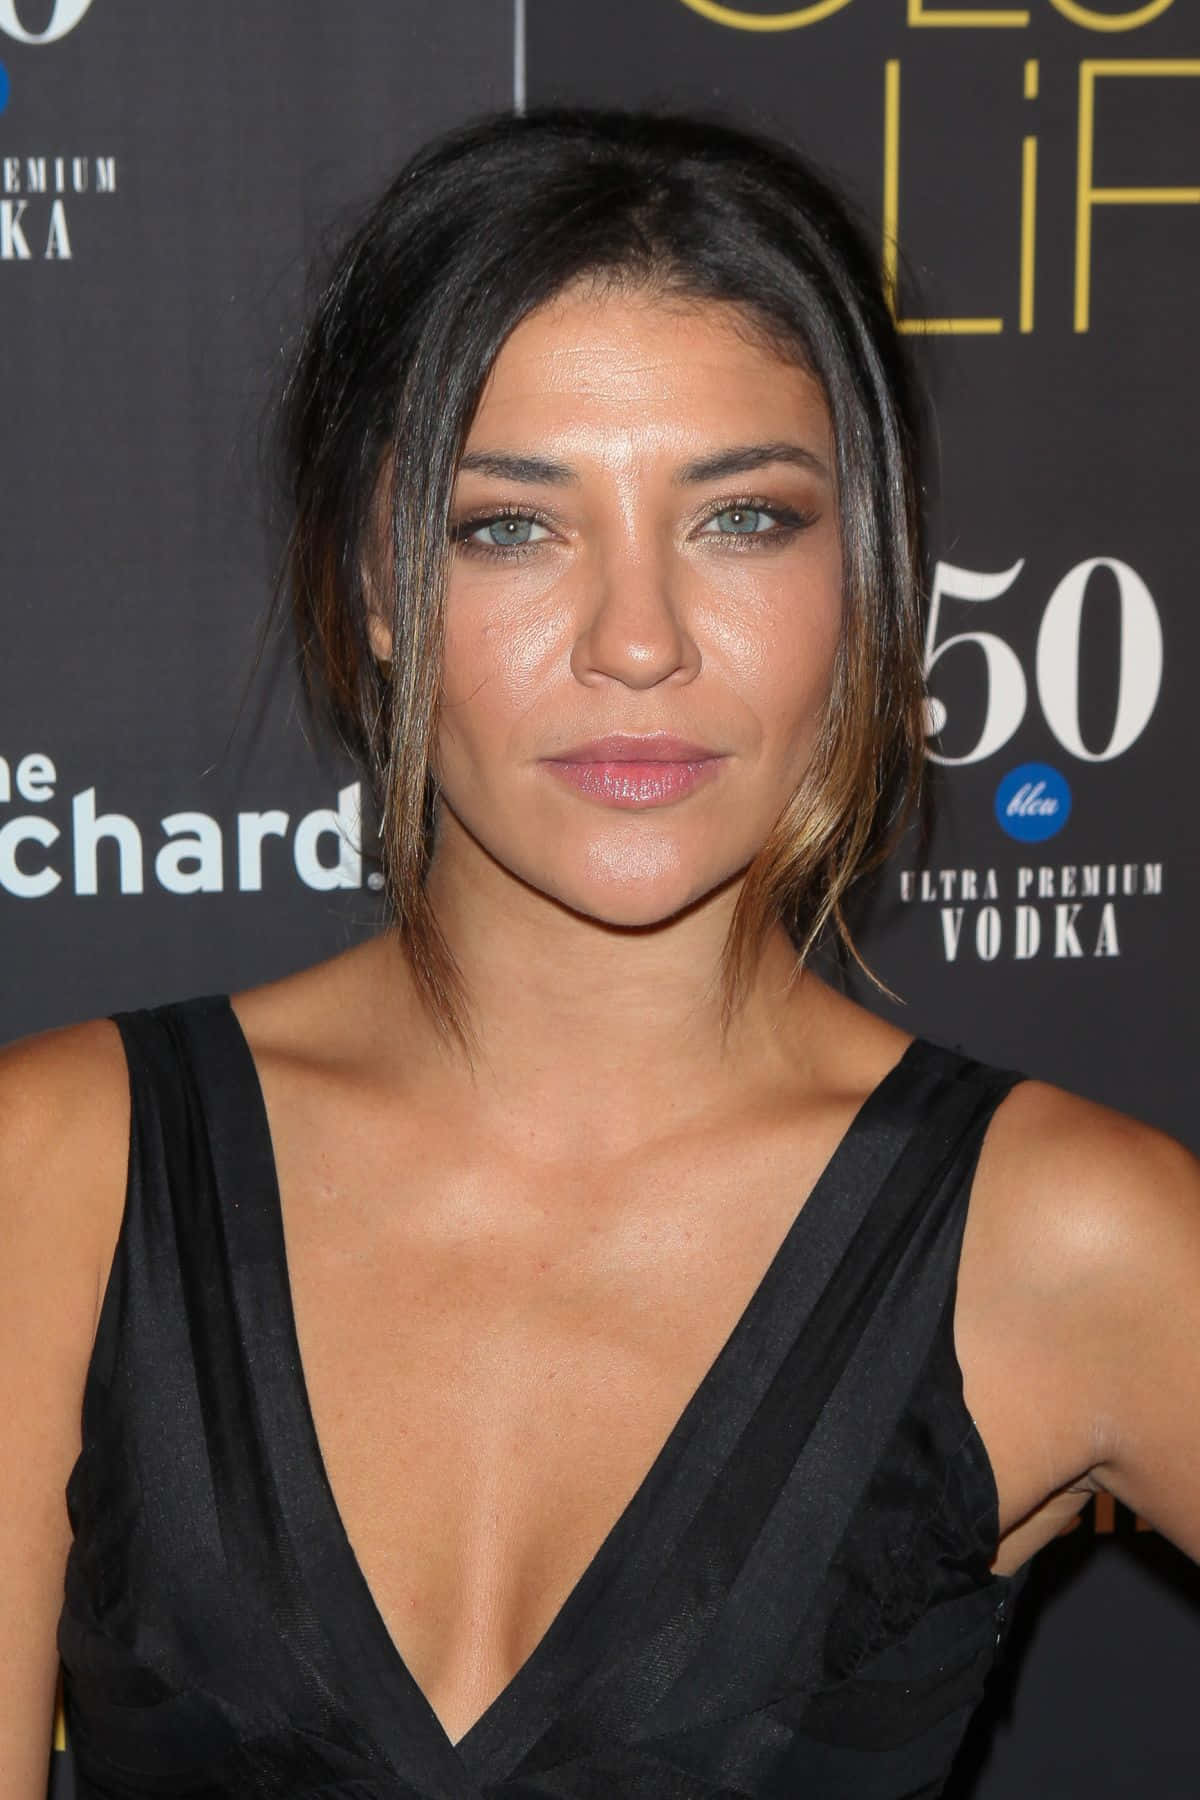 Jessica Szohr Posing Gracefully In A Black Outfit Background